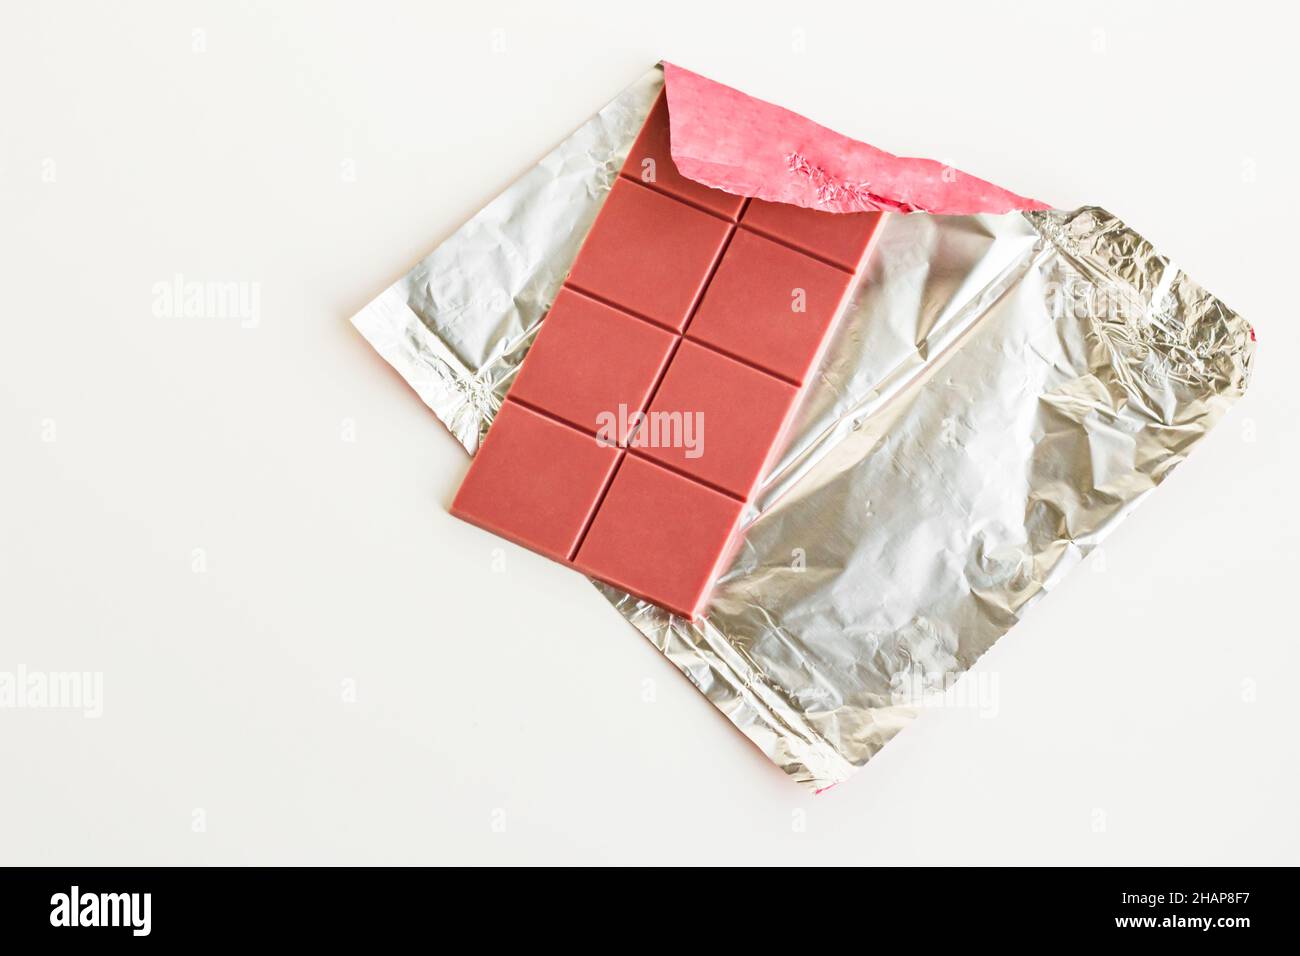 Fourth type in chocolate: Ruby on the aluminum own packagingat white surface with copy space,top view Stock Photo